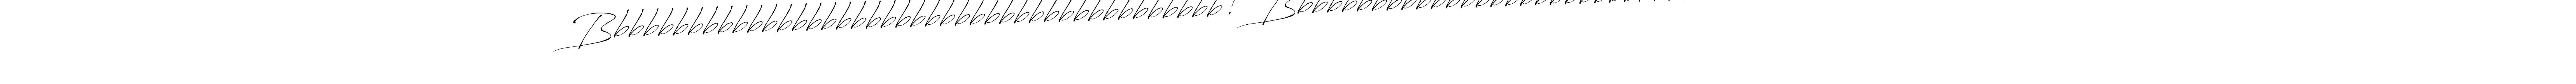 Use a signature maker to create a handwritten signature online. With this signature software, you can design (Antro_Vectra) your own signature for name Bbbbbbbbbbbbbbbbbbbbbbbbbbbbbbbbbbbbbbbbbb! Bbbbbbbbbbbbbbbbbbbbbbbbbbbbbbbbbbbbbbbbbbbbbbbb. Bbbbbbbbbbbbbbbbbbbbbbbbbbbbbbbbbbbbbbbbbb! Bbbbbbbbbbbbbbbbbbbbbbbbbbbbbbbbbbbbbbbbbbbbbbbb signature style 6 images and pictures png